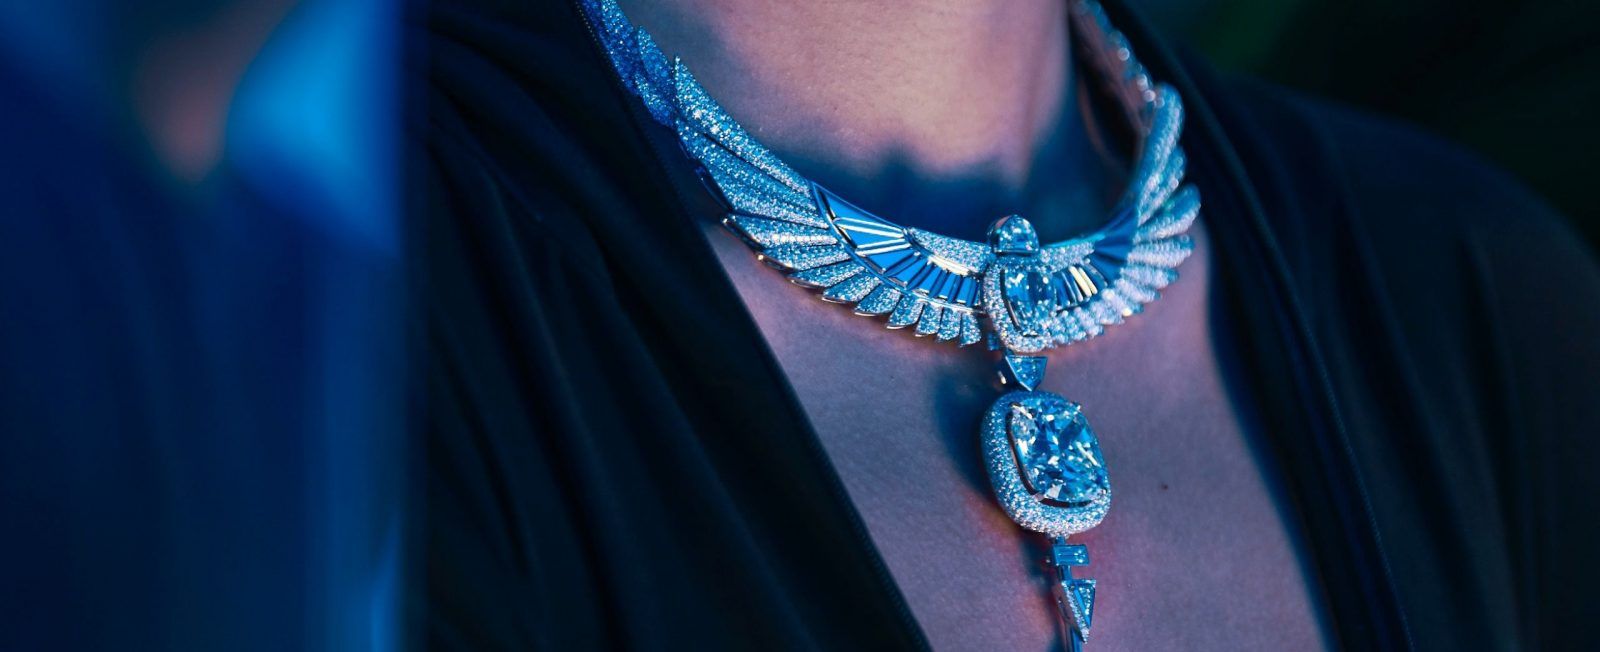 Gucci's new high jewellery collection is worthy of a fantastical